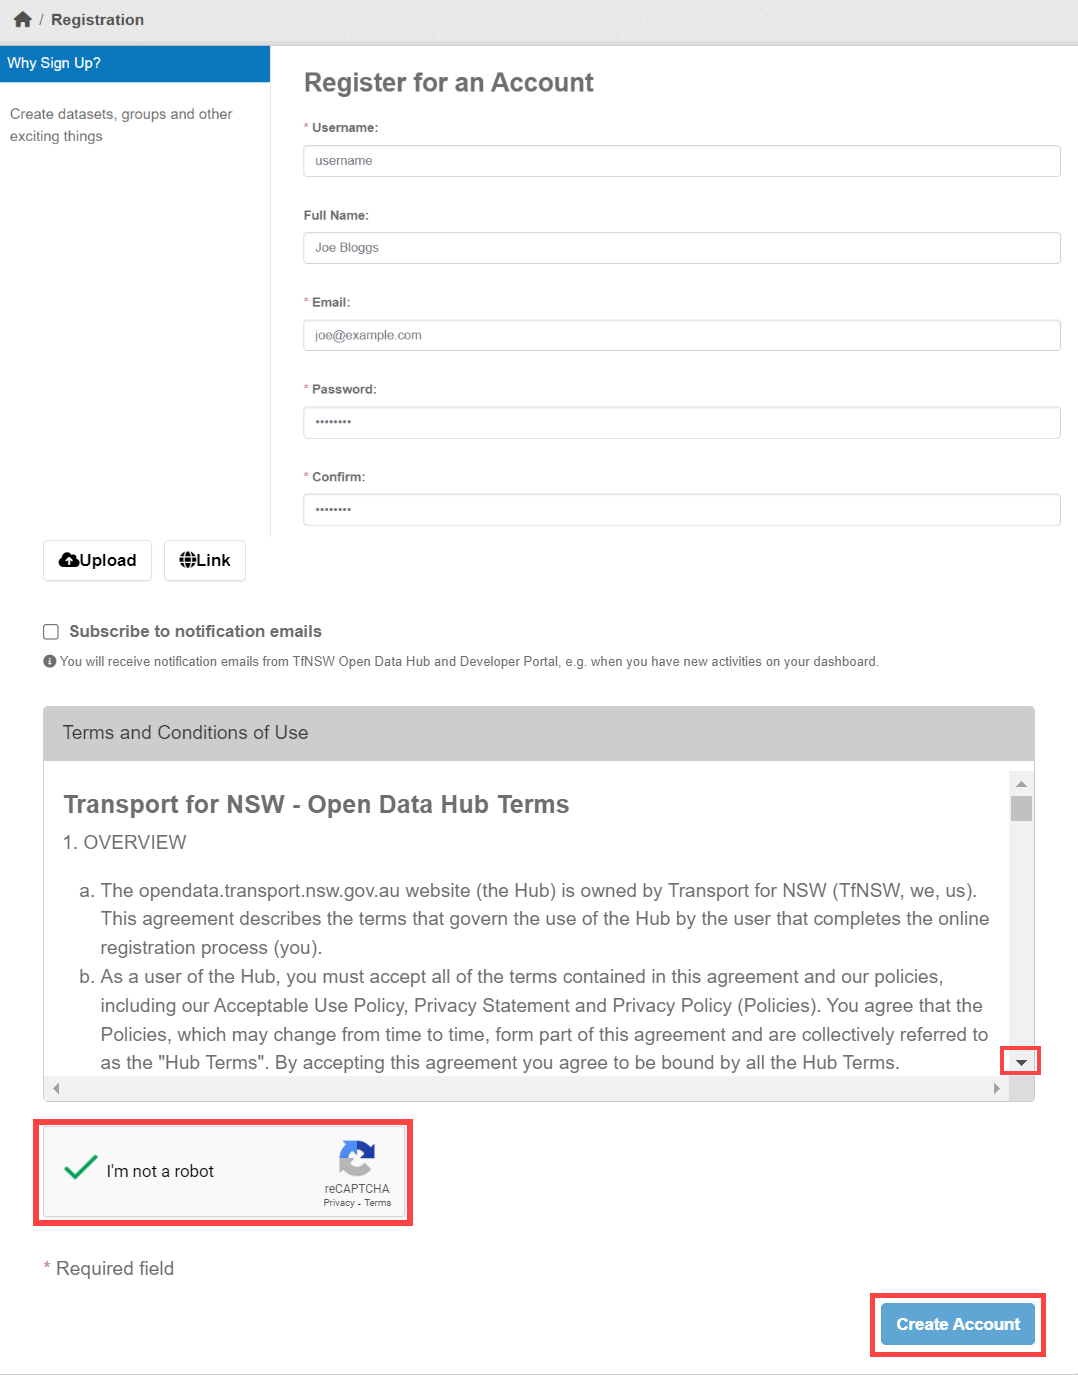 Image of Open Data Hub registration page with red square highlighting the Terms and Conditions scroll down button, a red square highlighting the reCaptcha box and a red square highlighting the create account box